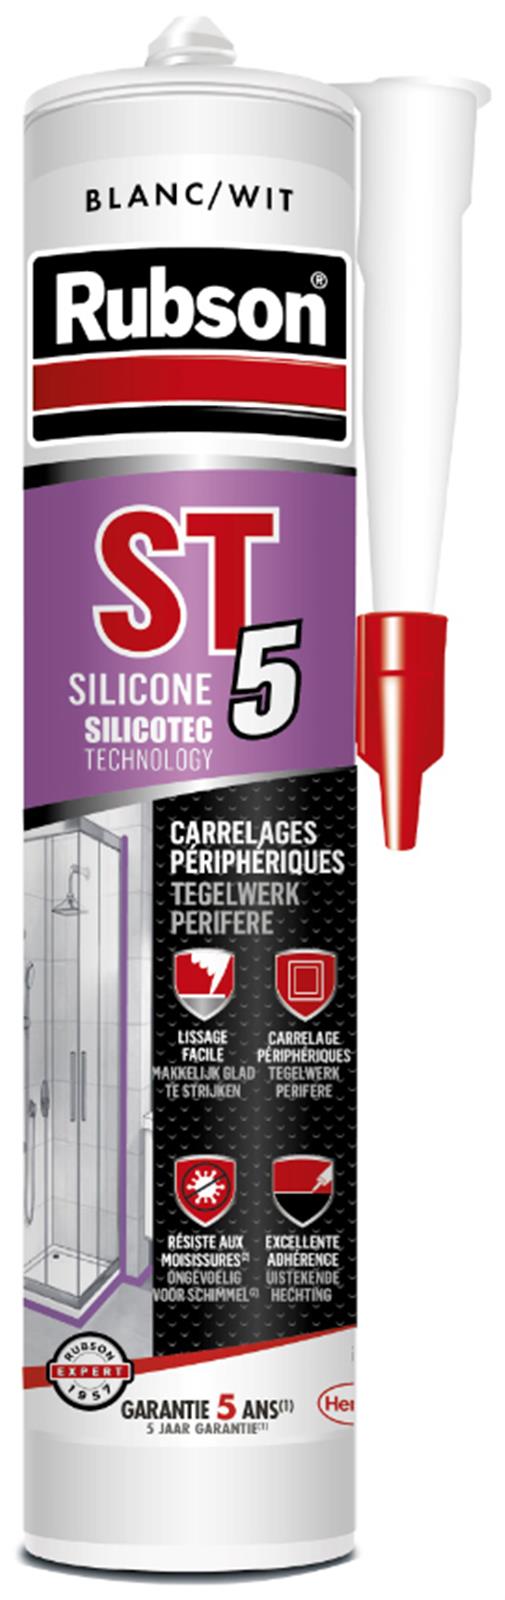 RUBSON Mastic ST5 sanitaire multi-usages (cartouche 300 ml) - Cartouche de 300 ml - Multi usage - GR